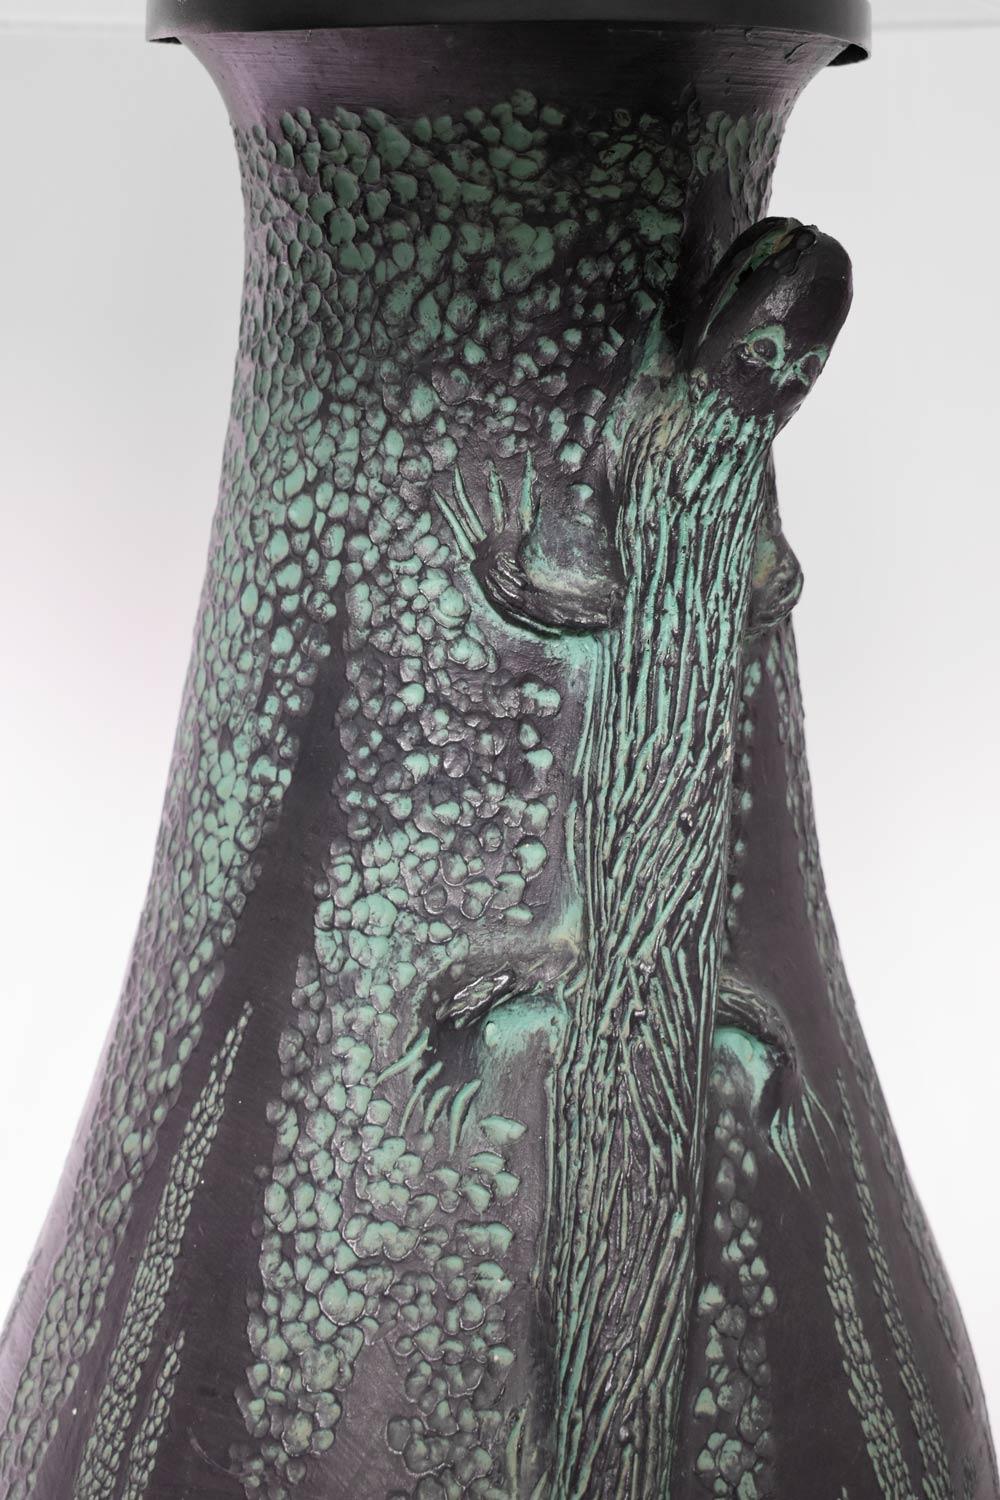 Glazed and incised terracotta lamp decorated with low relief lizards on a black background. France, 1970s.